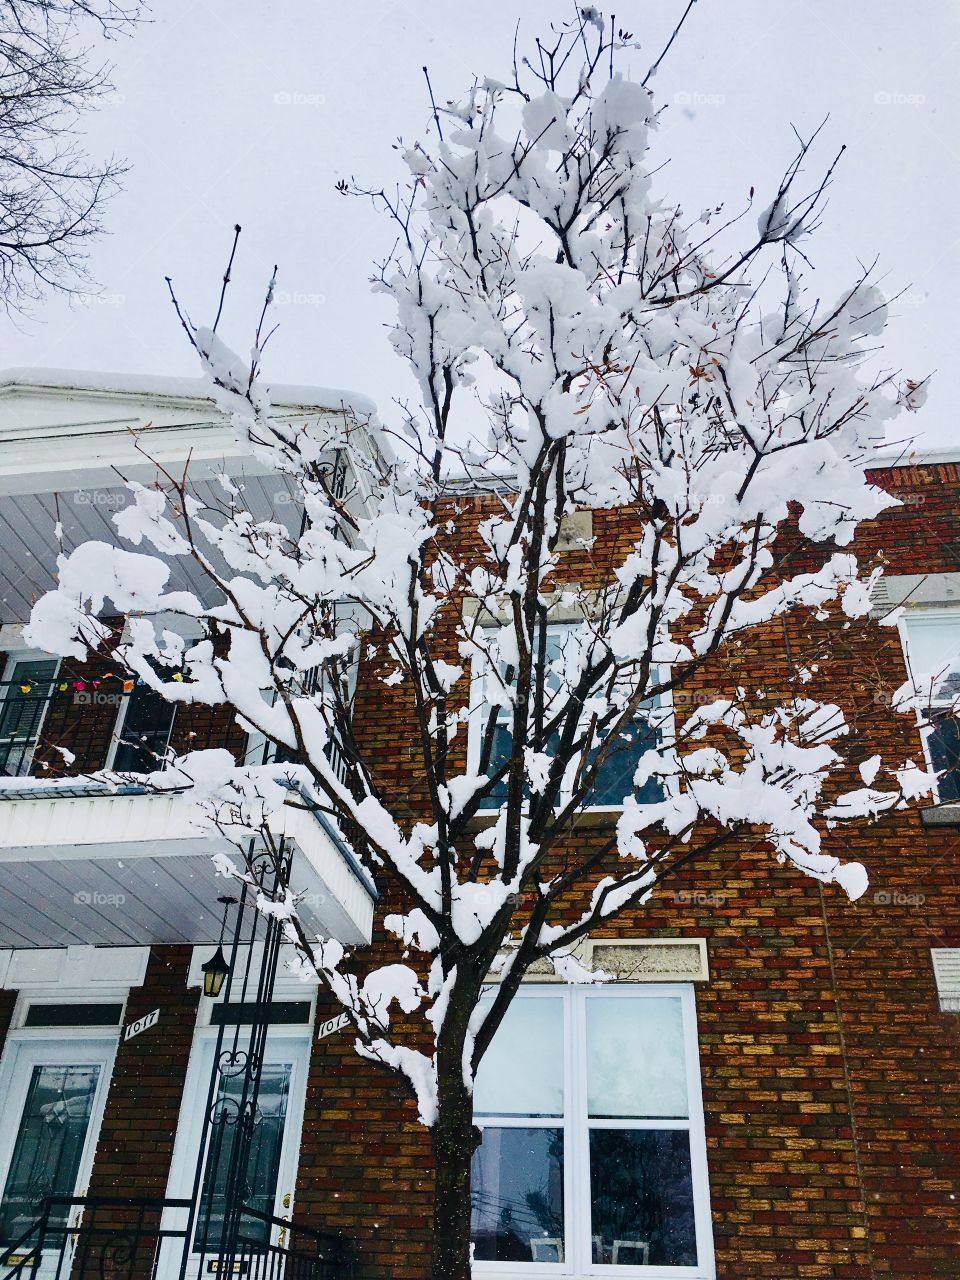 Tree Covered with Snow- March 14 2017- Montreal, Quebec, Canada 